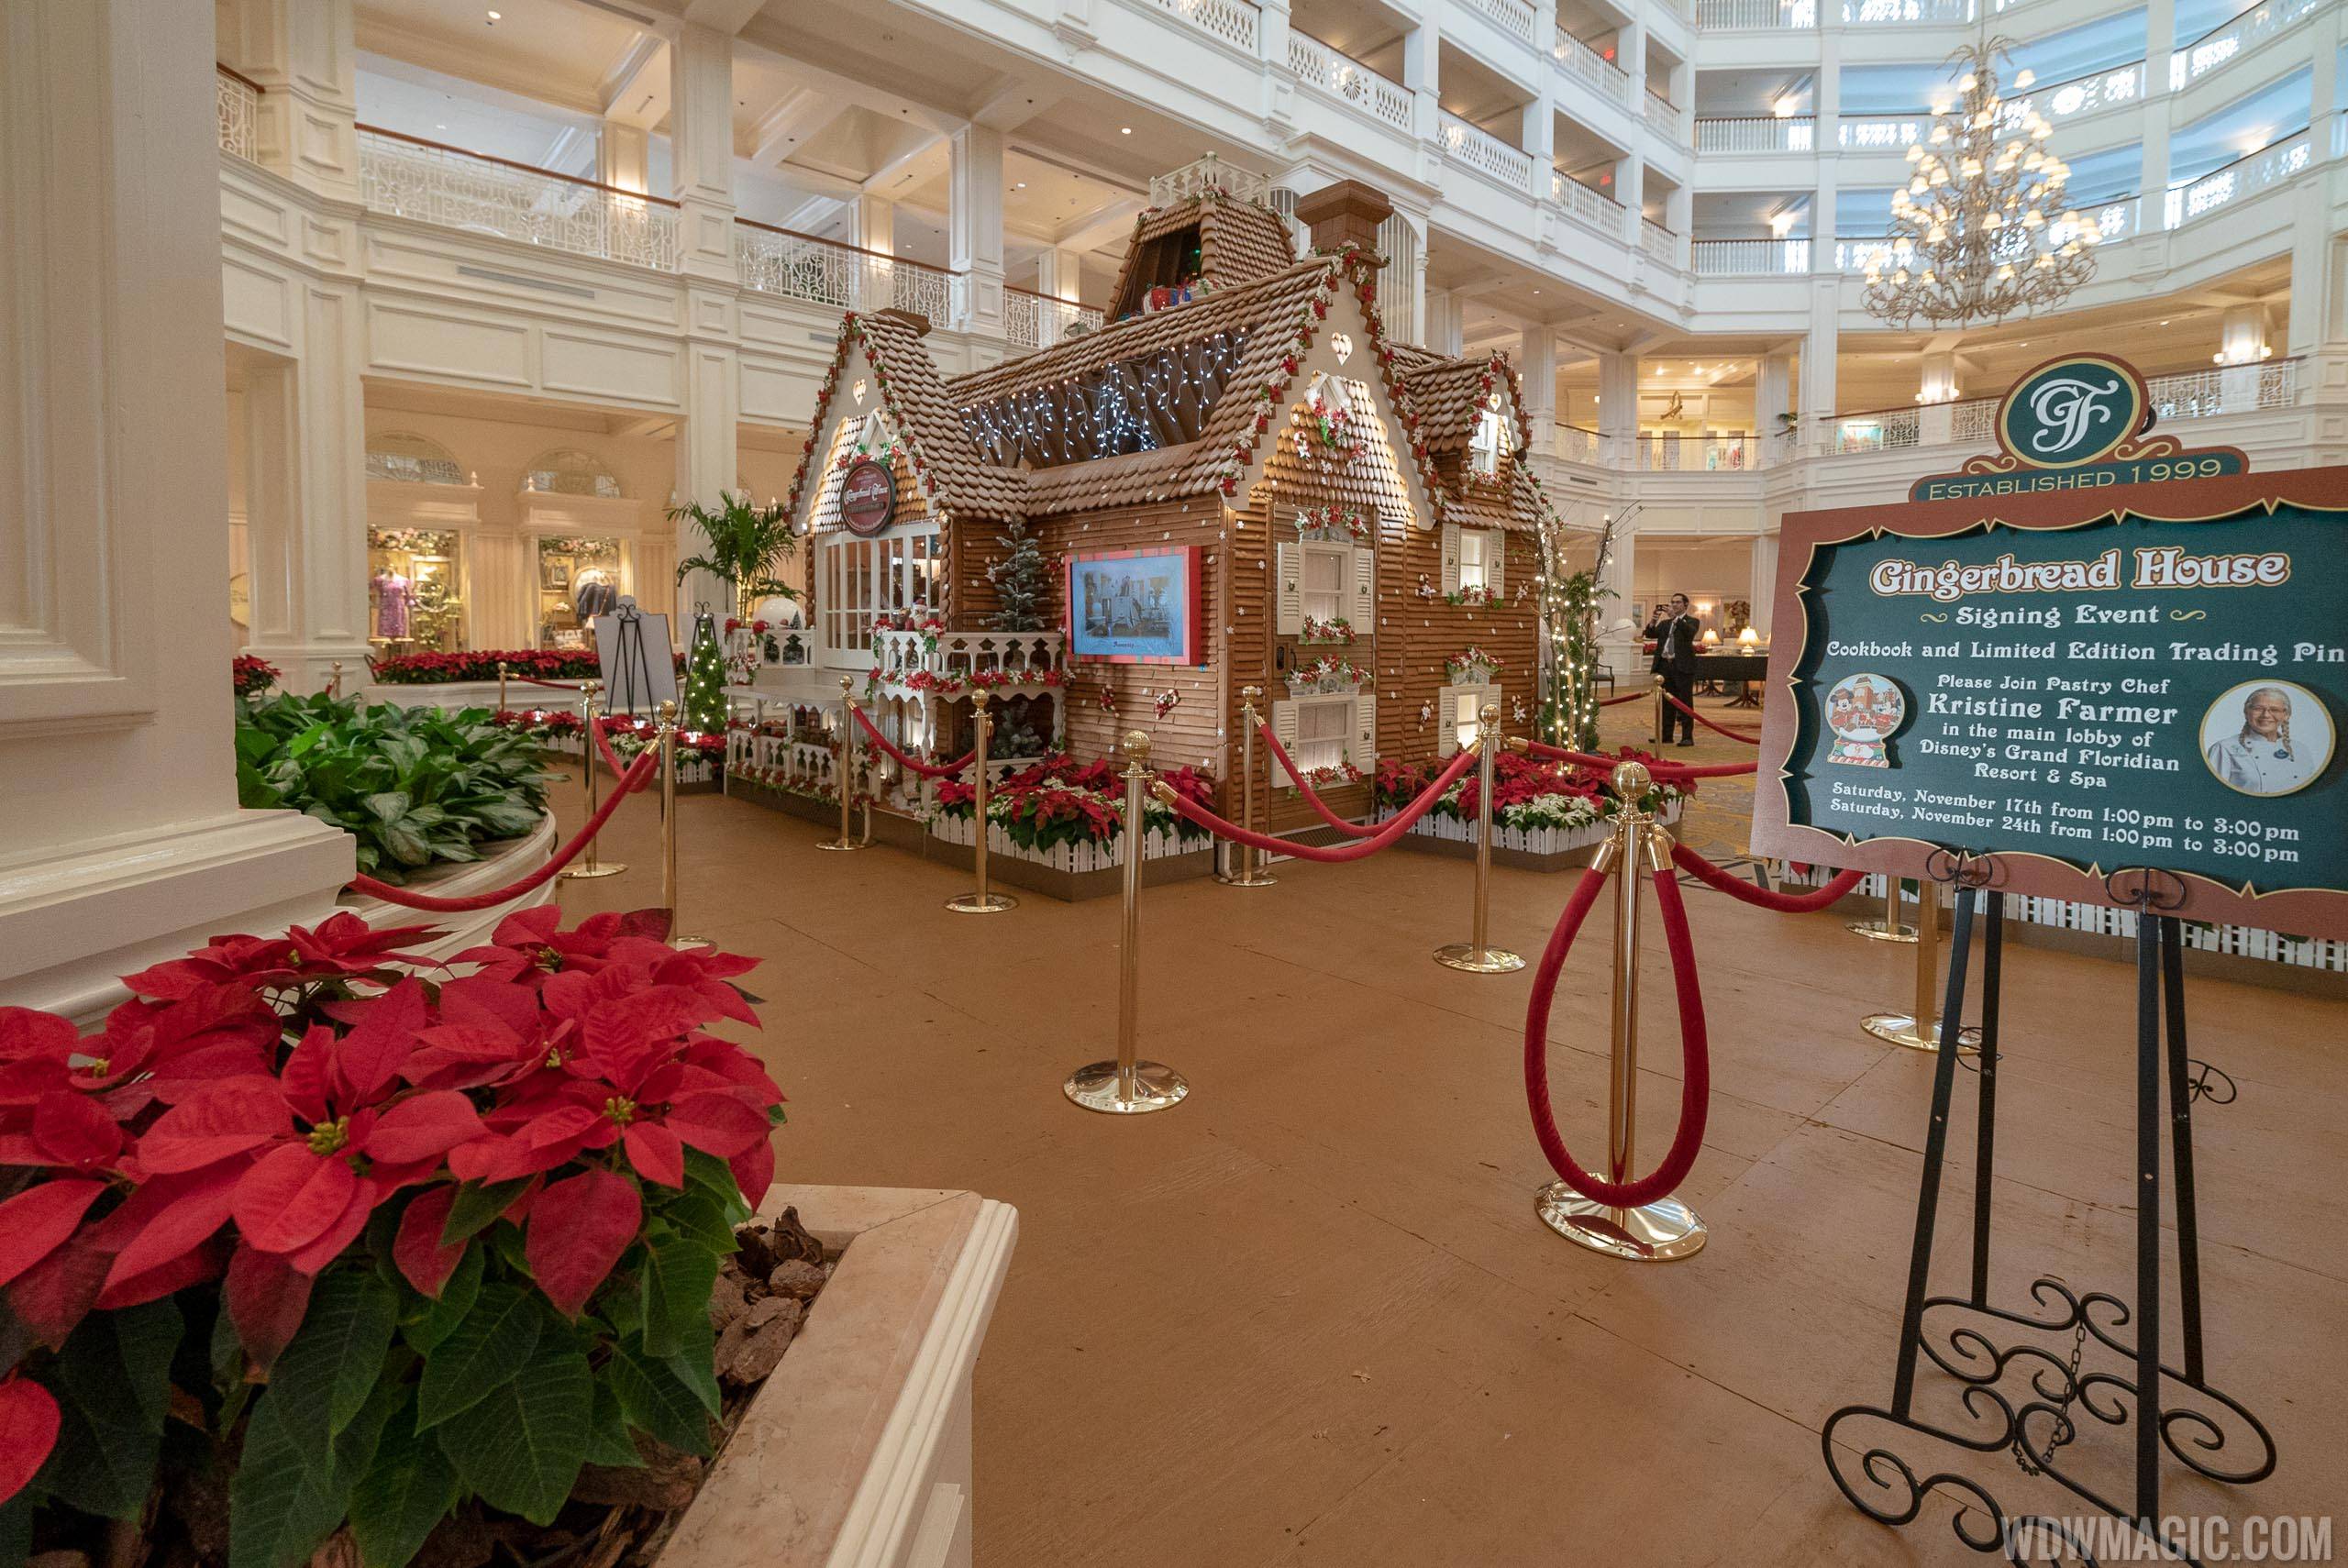 VIDEO - Time-lapse of building the Grand Floridian Resort Gingerbread House